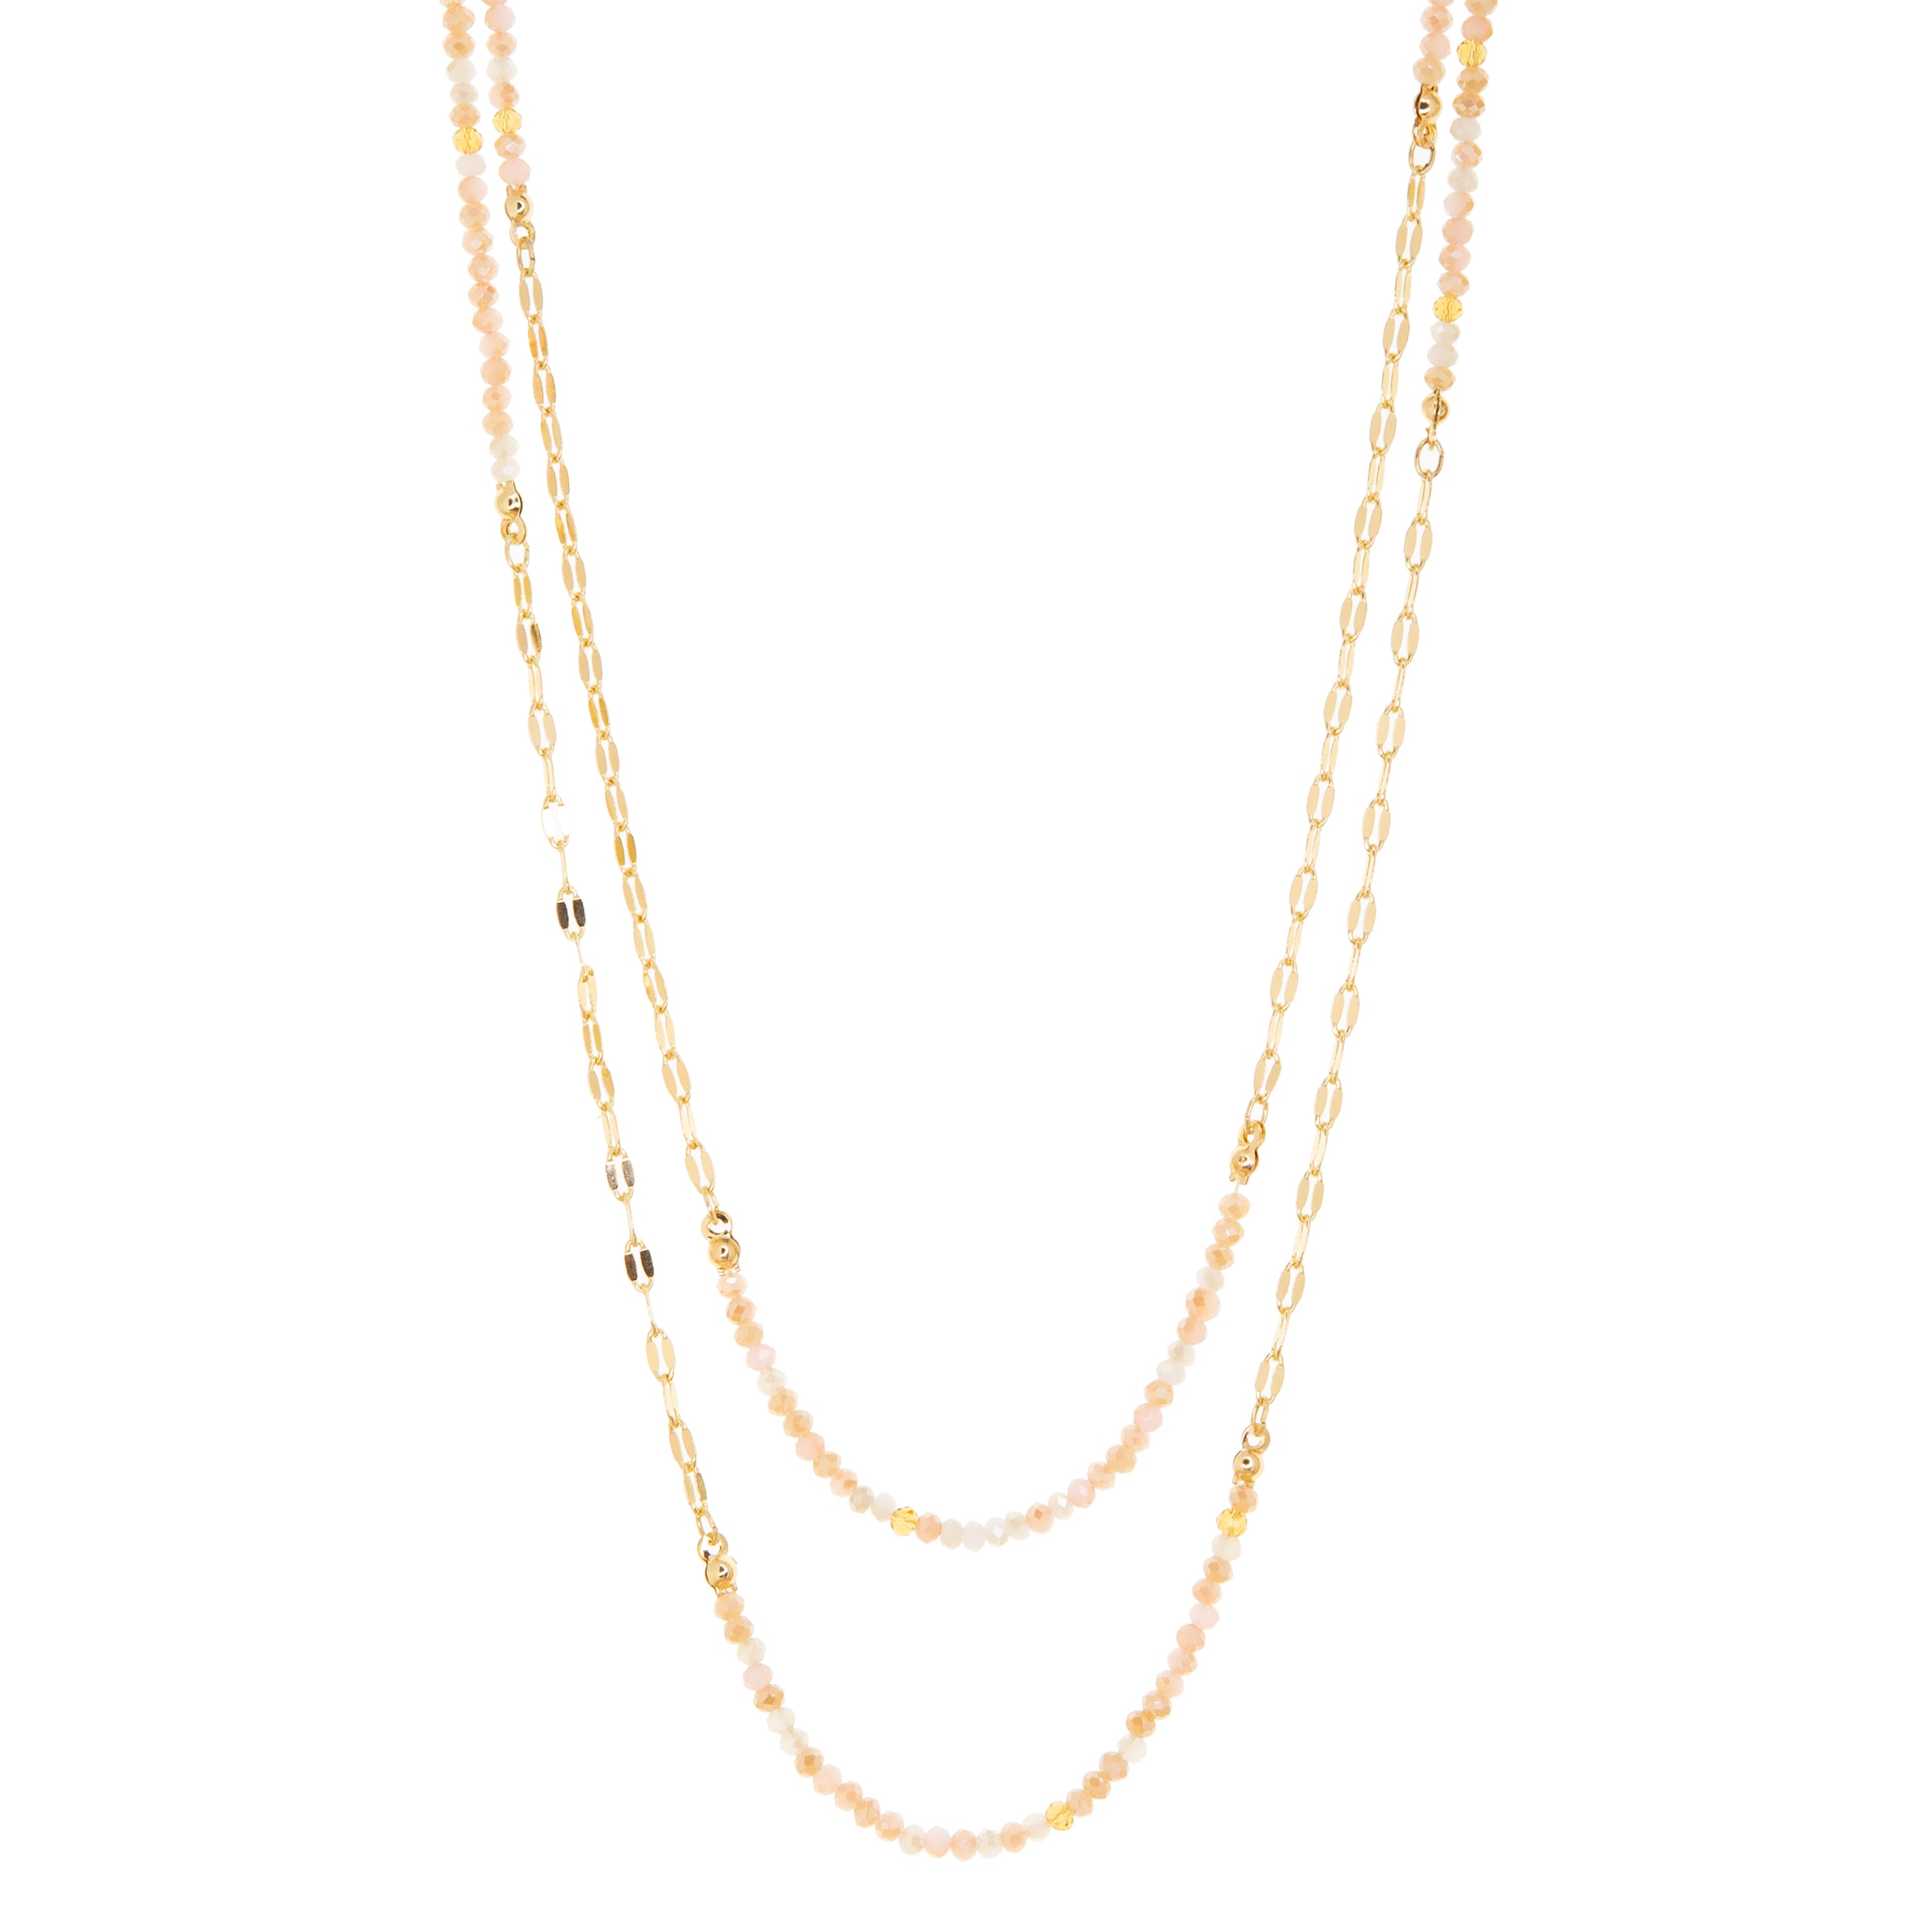 crystal bead and chain necklace